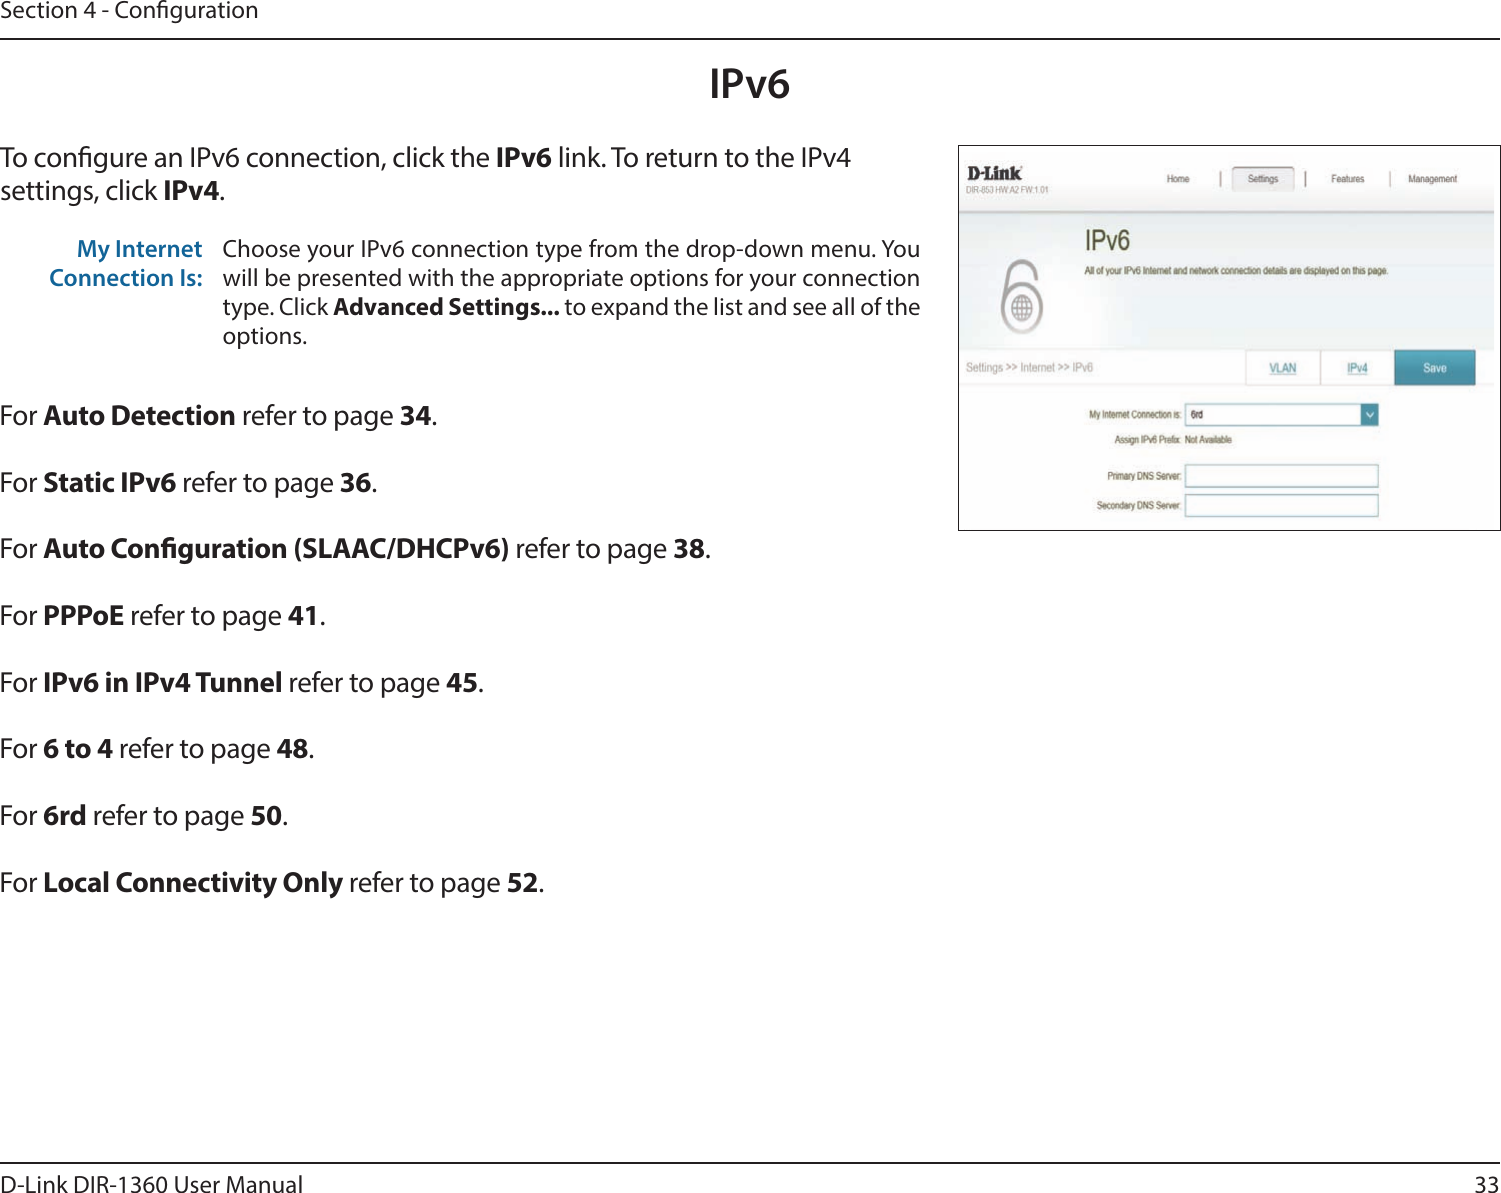 33D-Link DIR-1360 User ManualSection 4 - CongurationIPv6To congure an IPv6 connection, click the IPv6 link. To return to the IPv4 settings, click IPv4.For Auto Detection refer to page 34.For Static IPv6 refer to page 36.For Auto Conguration (SLAAC/DHCPv6) refer to page 38.For PPPoE refer to page 41.For IPv6 in IPv4 Tunnel refer to page 45.For 6 to 4 refer to page 48.For 6rd refer to page 50.For Local Connectivity Only refer to page 52.My Internet Connection Is:Choose your IPv6 connection type from the drop-down menu. You will be presented with the appropriate options for your connection type. Click Advanced Settings... to expand the list and see all of the options.